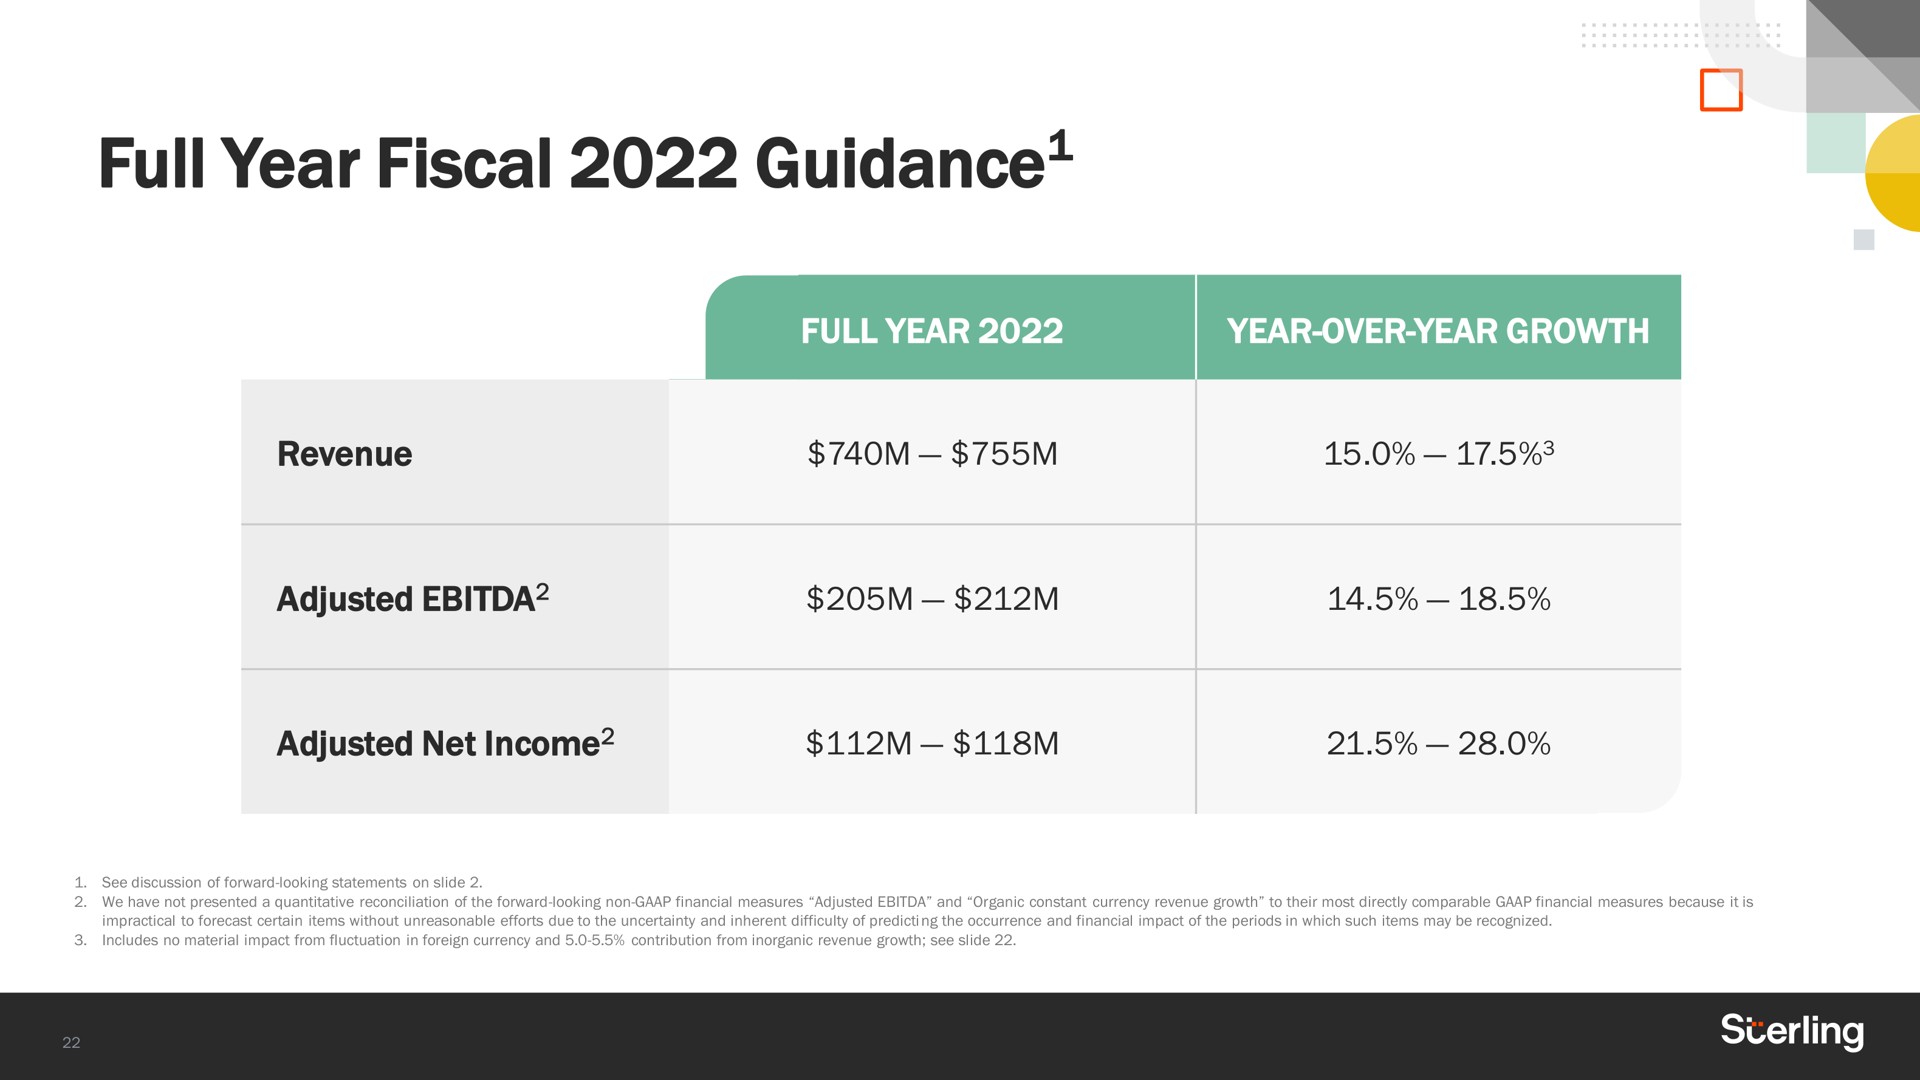 full year fiscal guidance full year year over year growth revenue adjusted adjusted net income guidance | Sterling